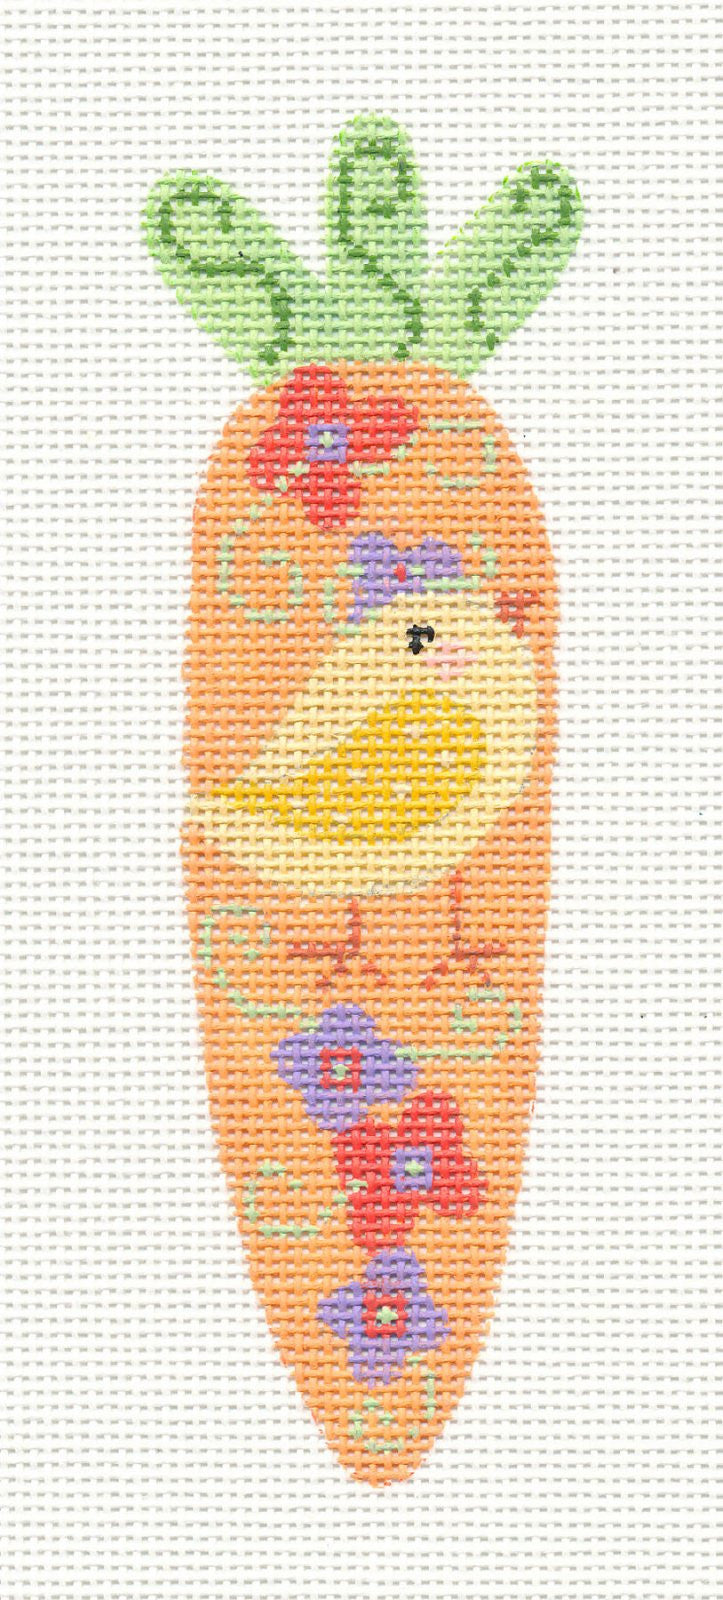 Easter-Chick Carrot Ornament on Handpainted Needlepoint Canvas~ by Danji Designs